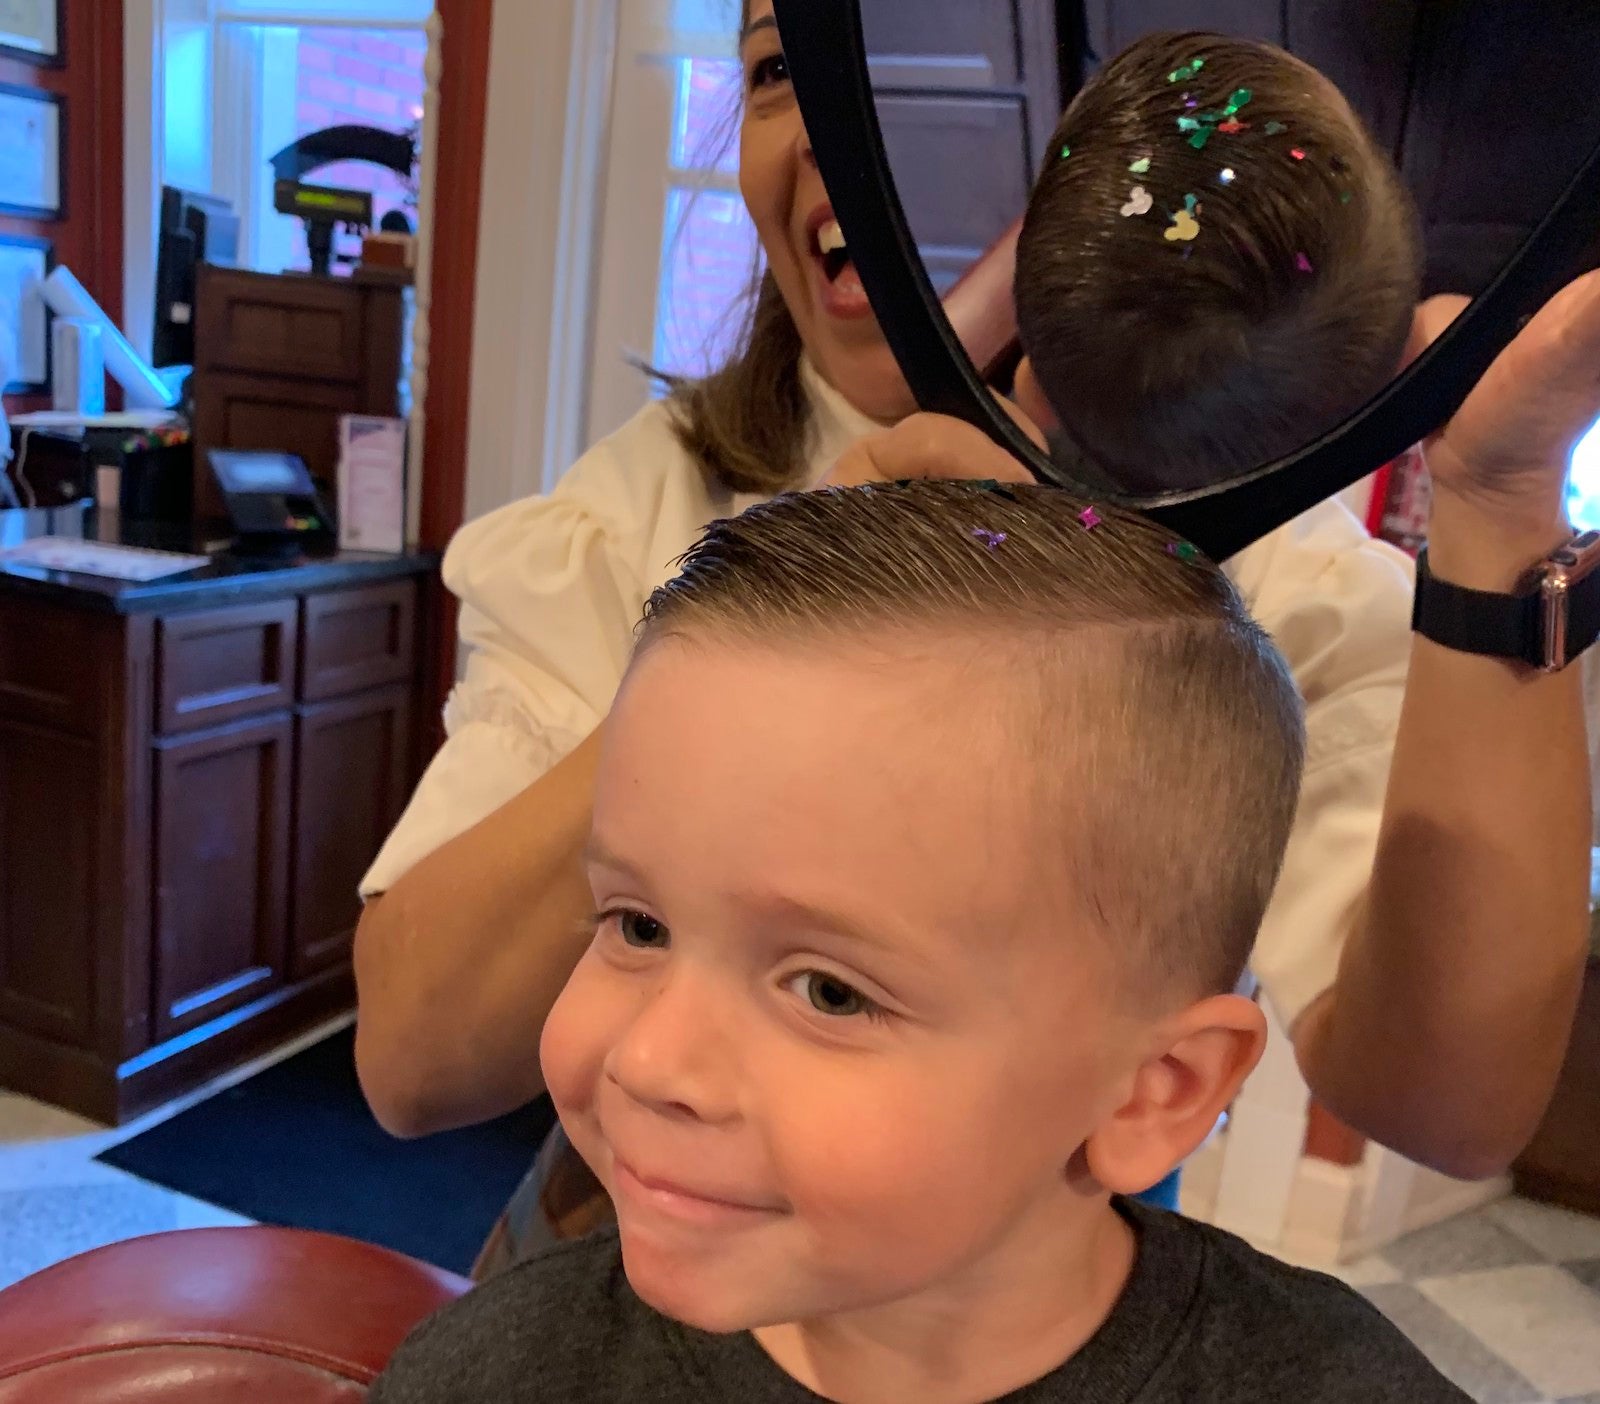 Child looking at haircut in the mirror